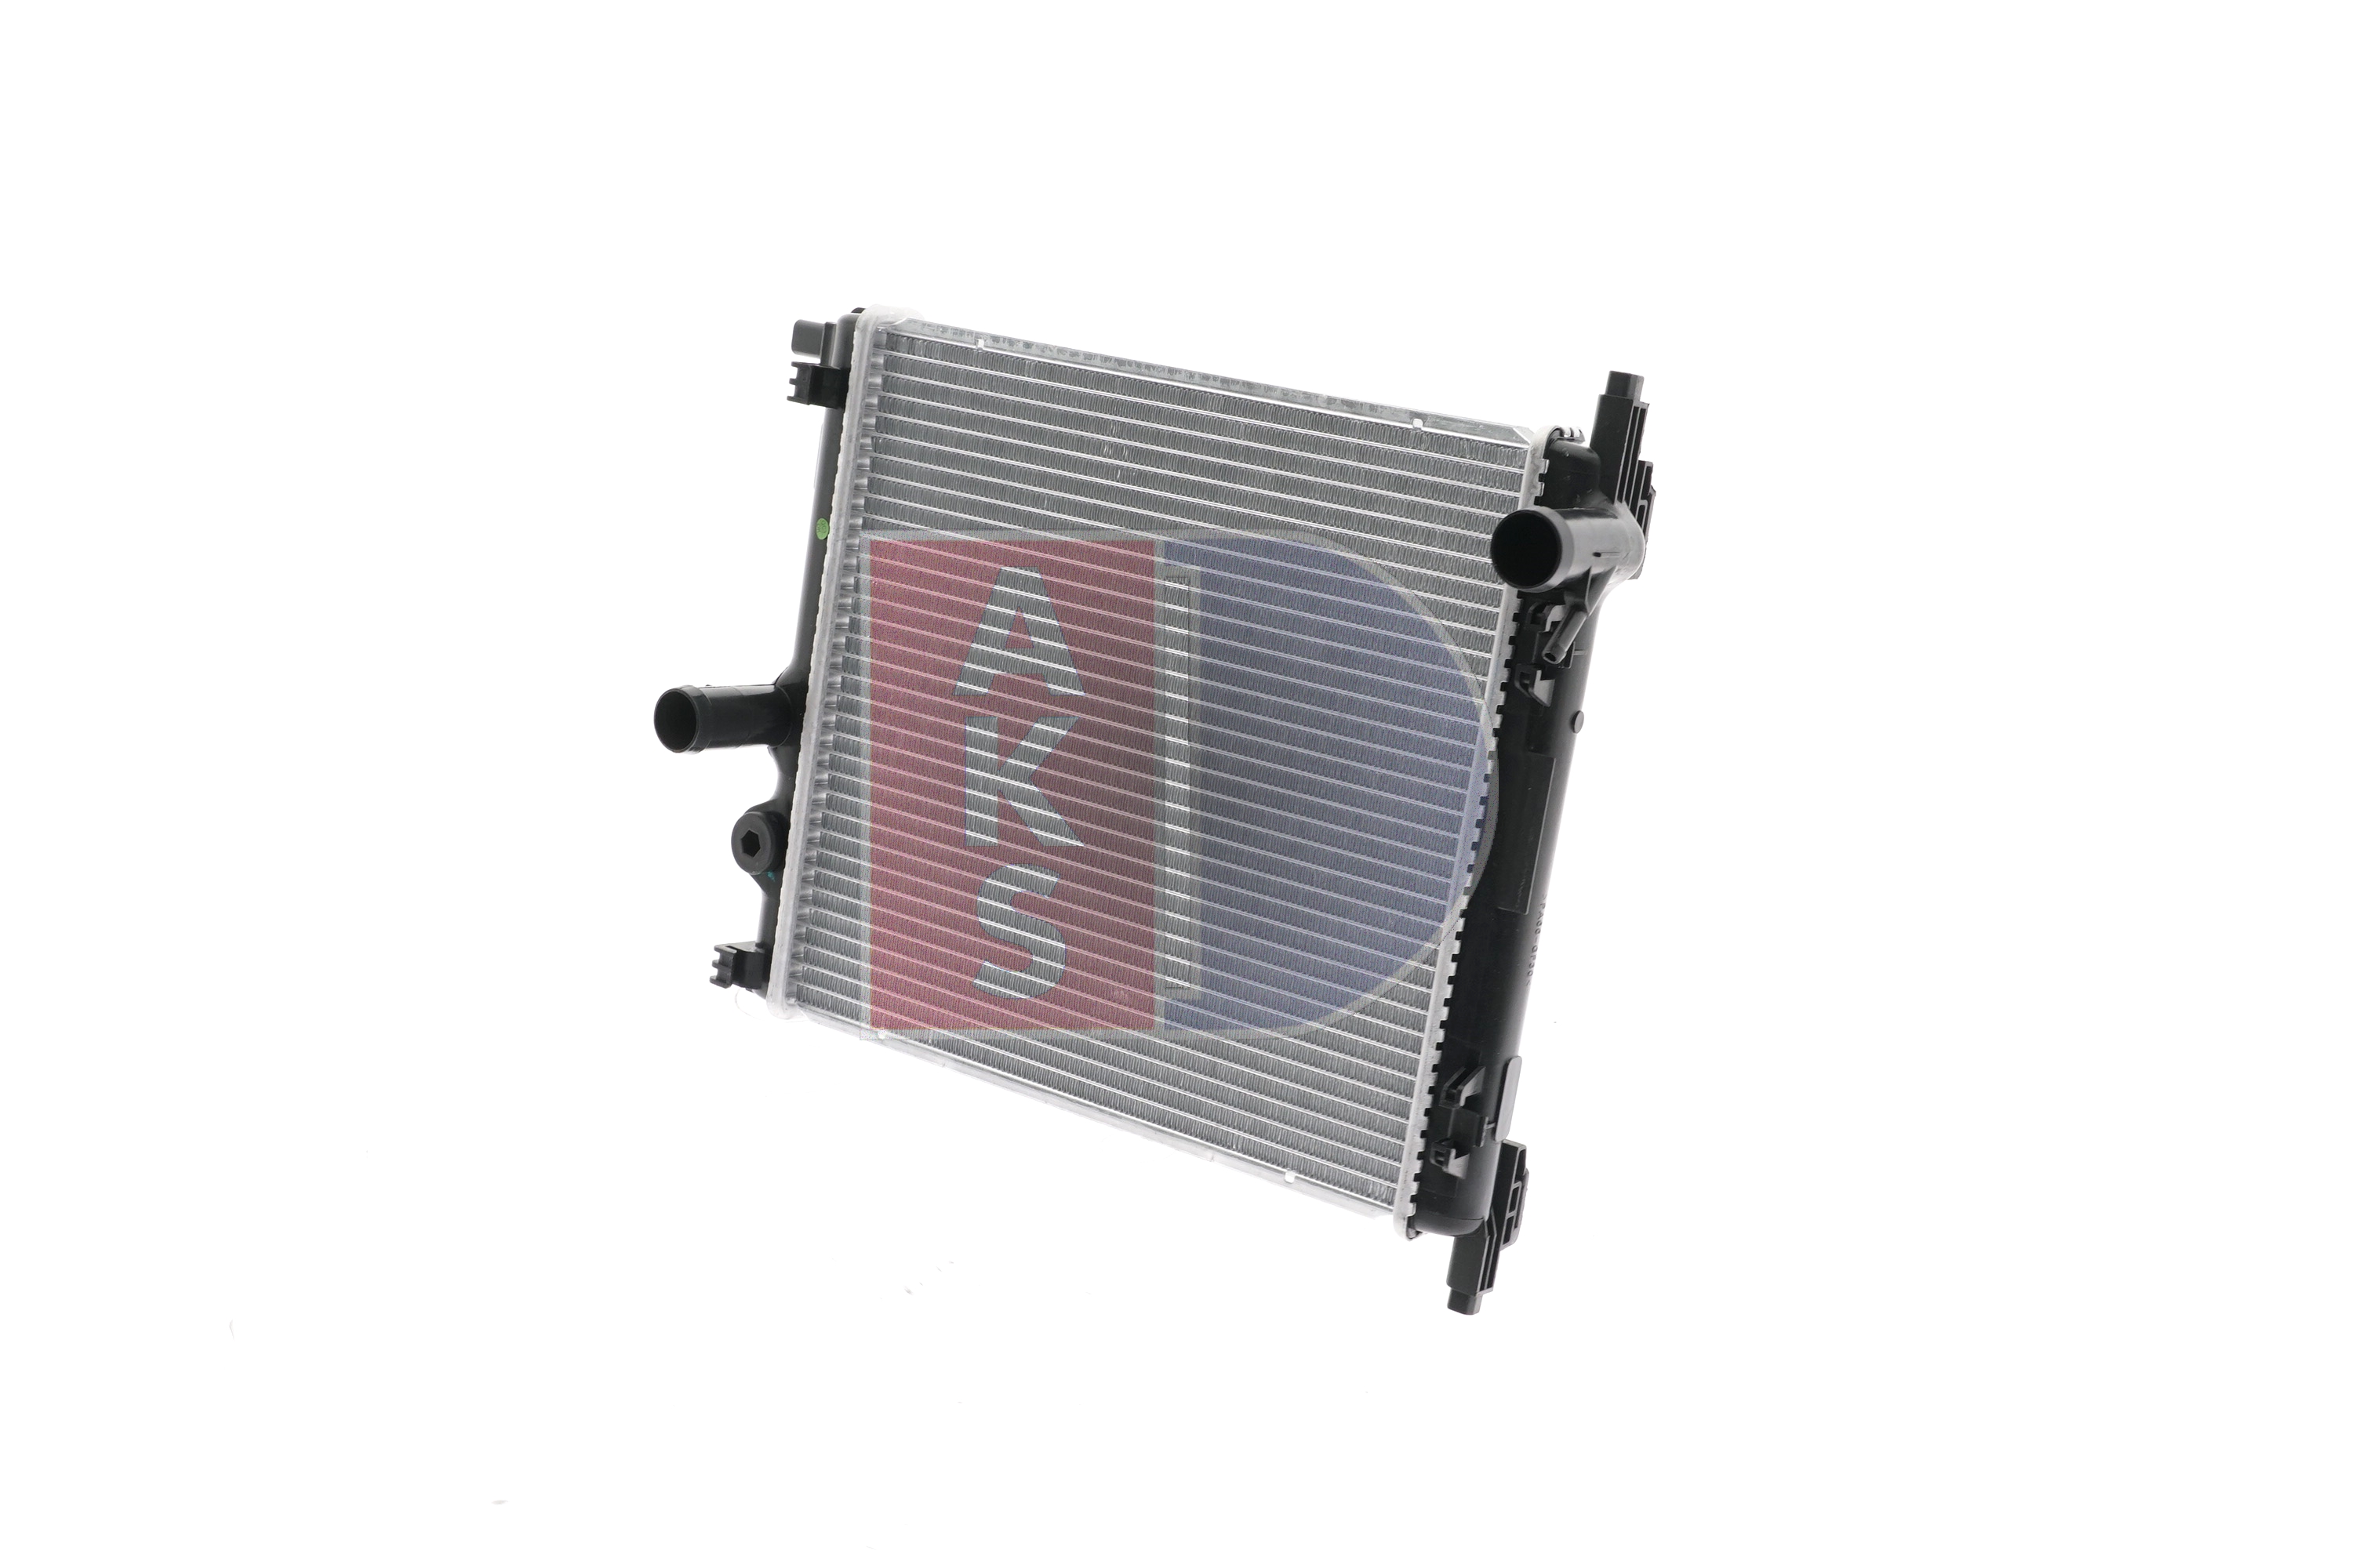 AKS DASIS 040050N Engine radiator Aluminium, for vehicles with/without air conditioning, 355 x 338 x 26 mm, Manual Transmission, Mechanically jointed cooling fins